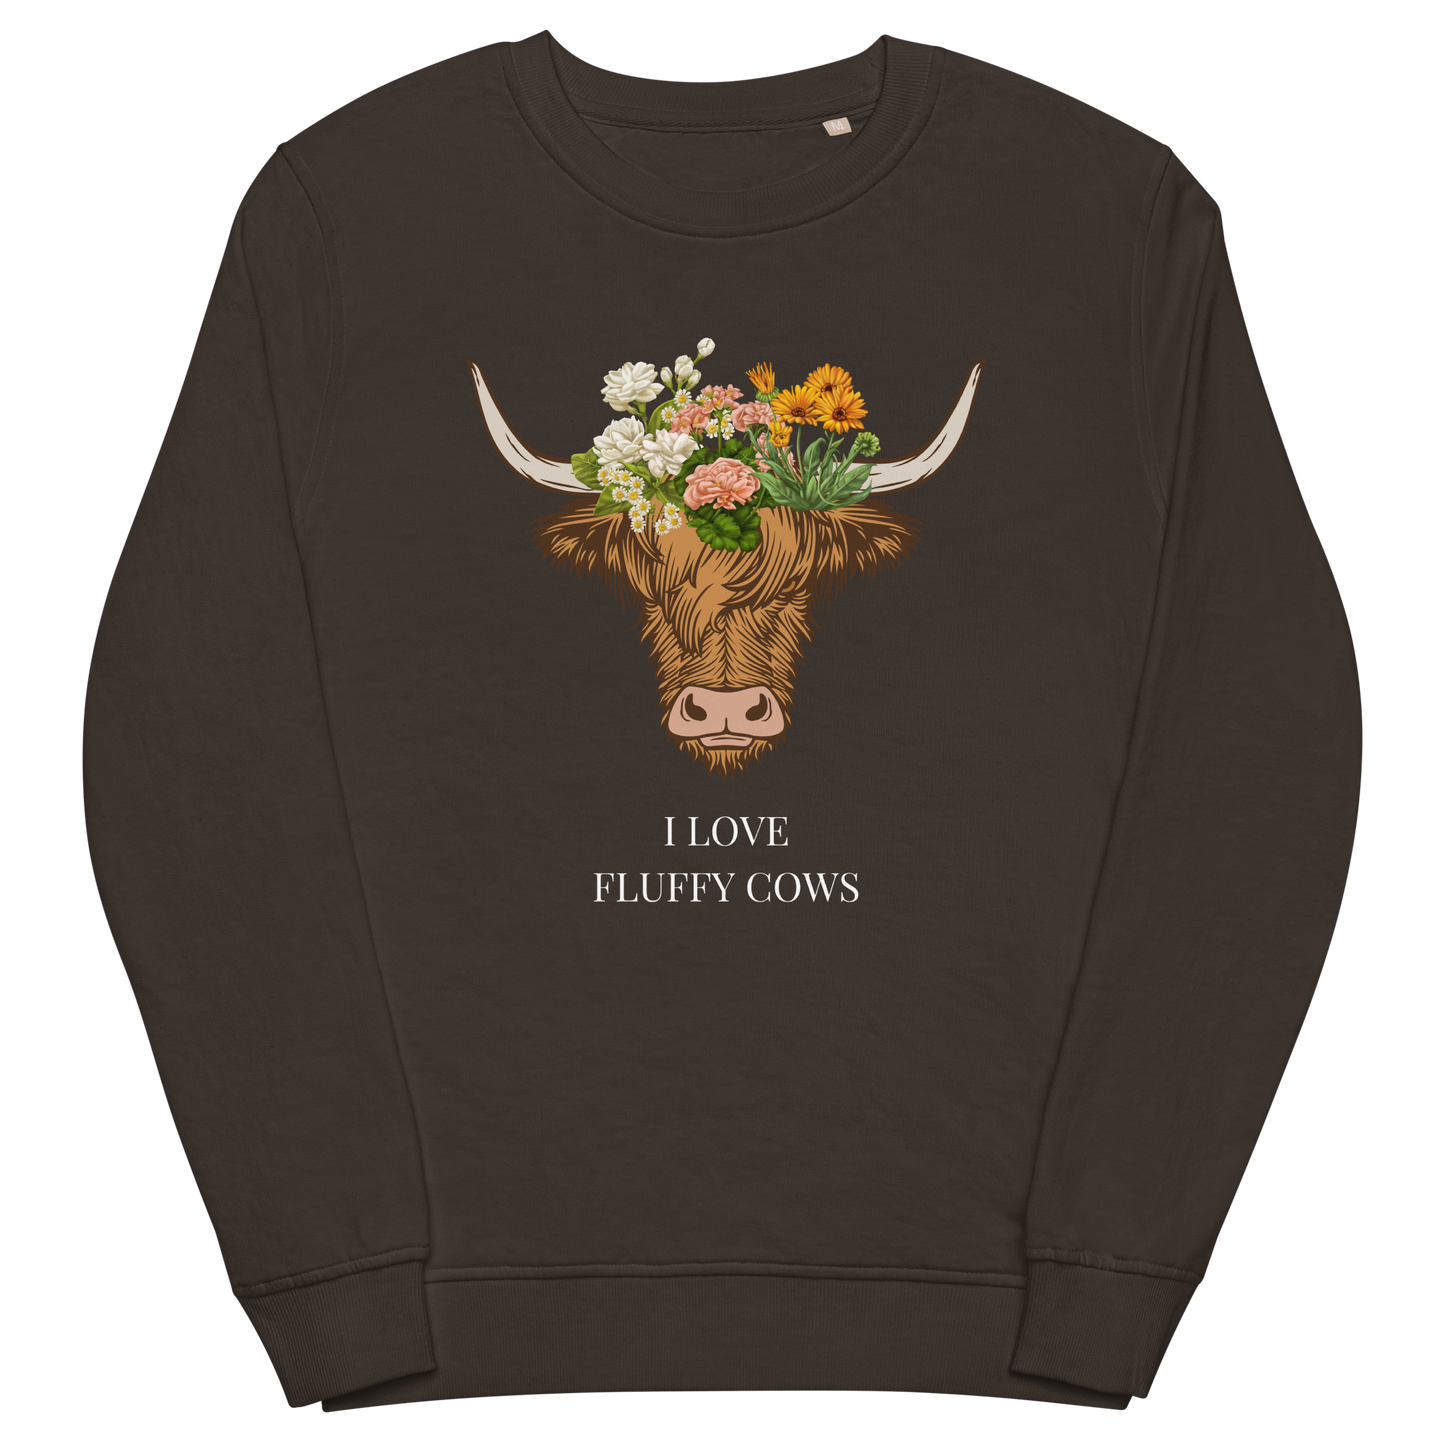 Deep Charcoal Grey Organic Cotton Highland Cow Sweatshirt featuring an adorable I Love Fluffy Cows graphic on the chest - Cute Graphic Highland Cow Sweatshirts - Boozy Fox